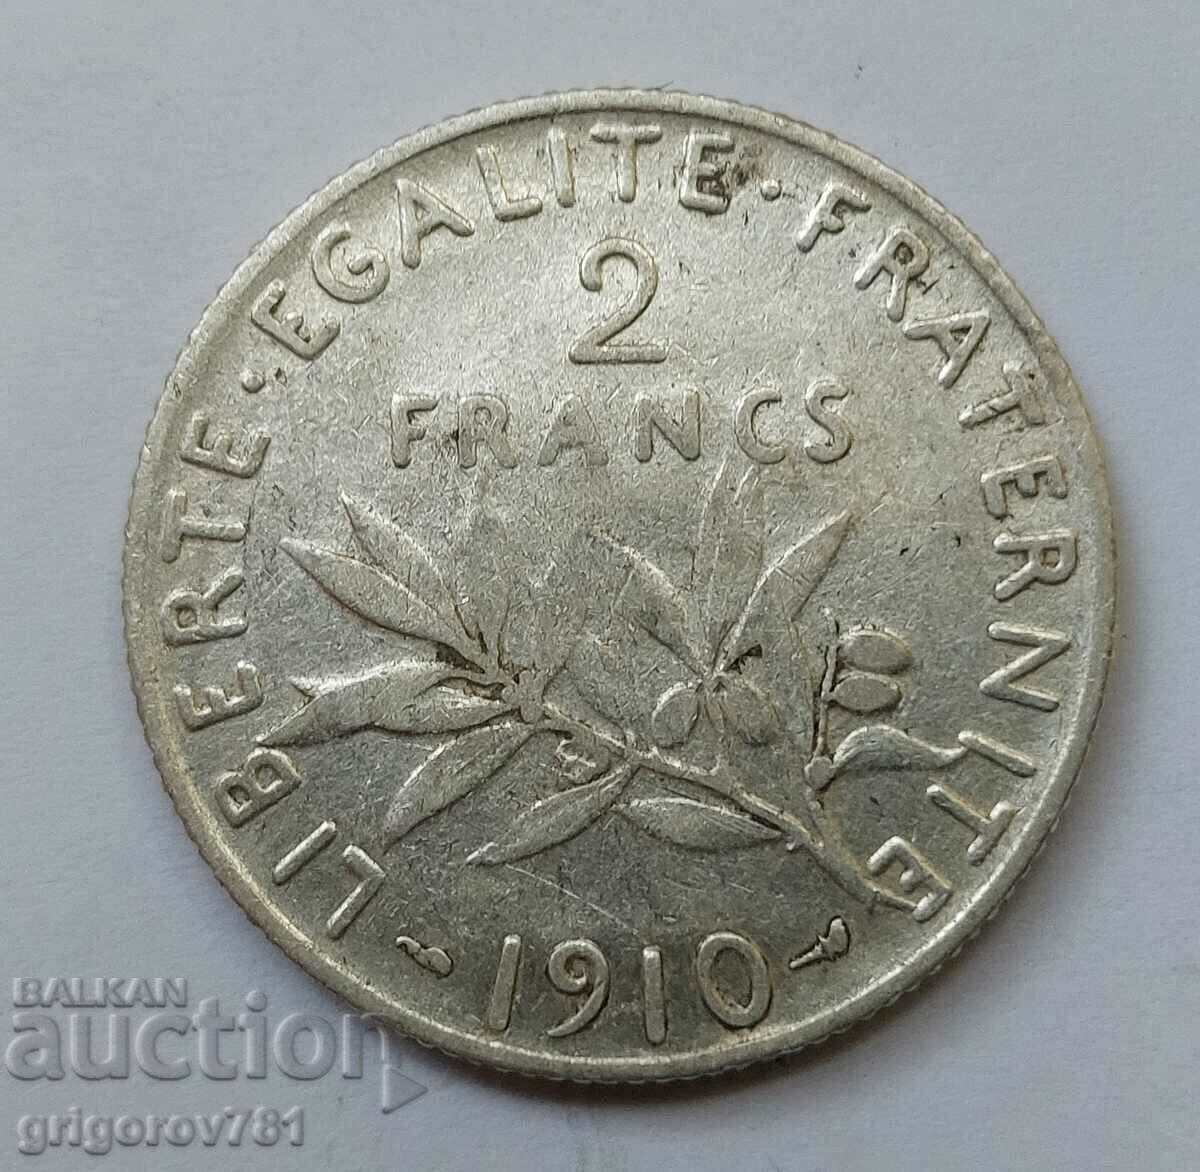 2 Francs Silver France 1910 - Silver Coin #148